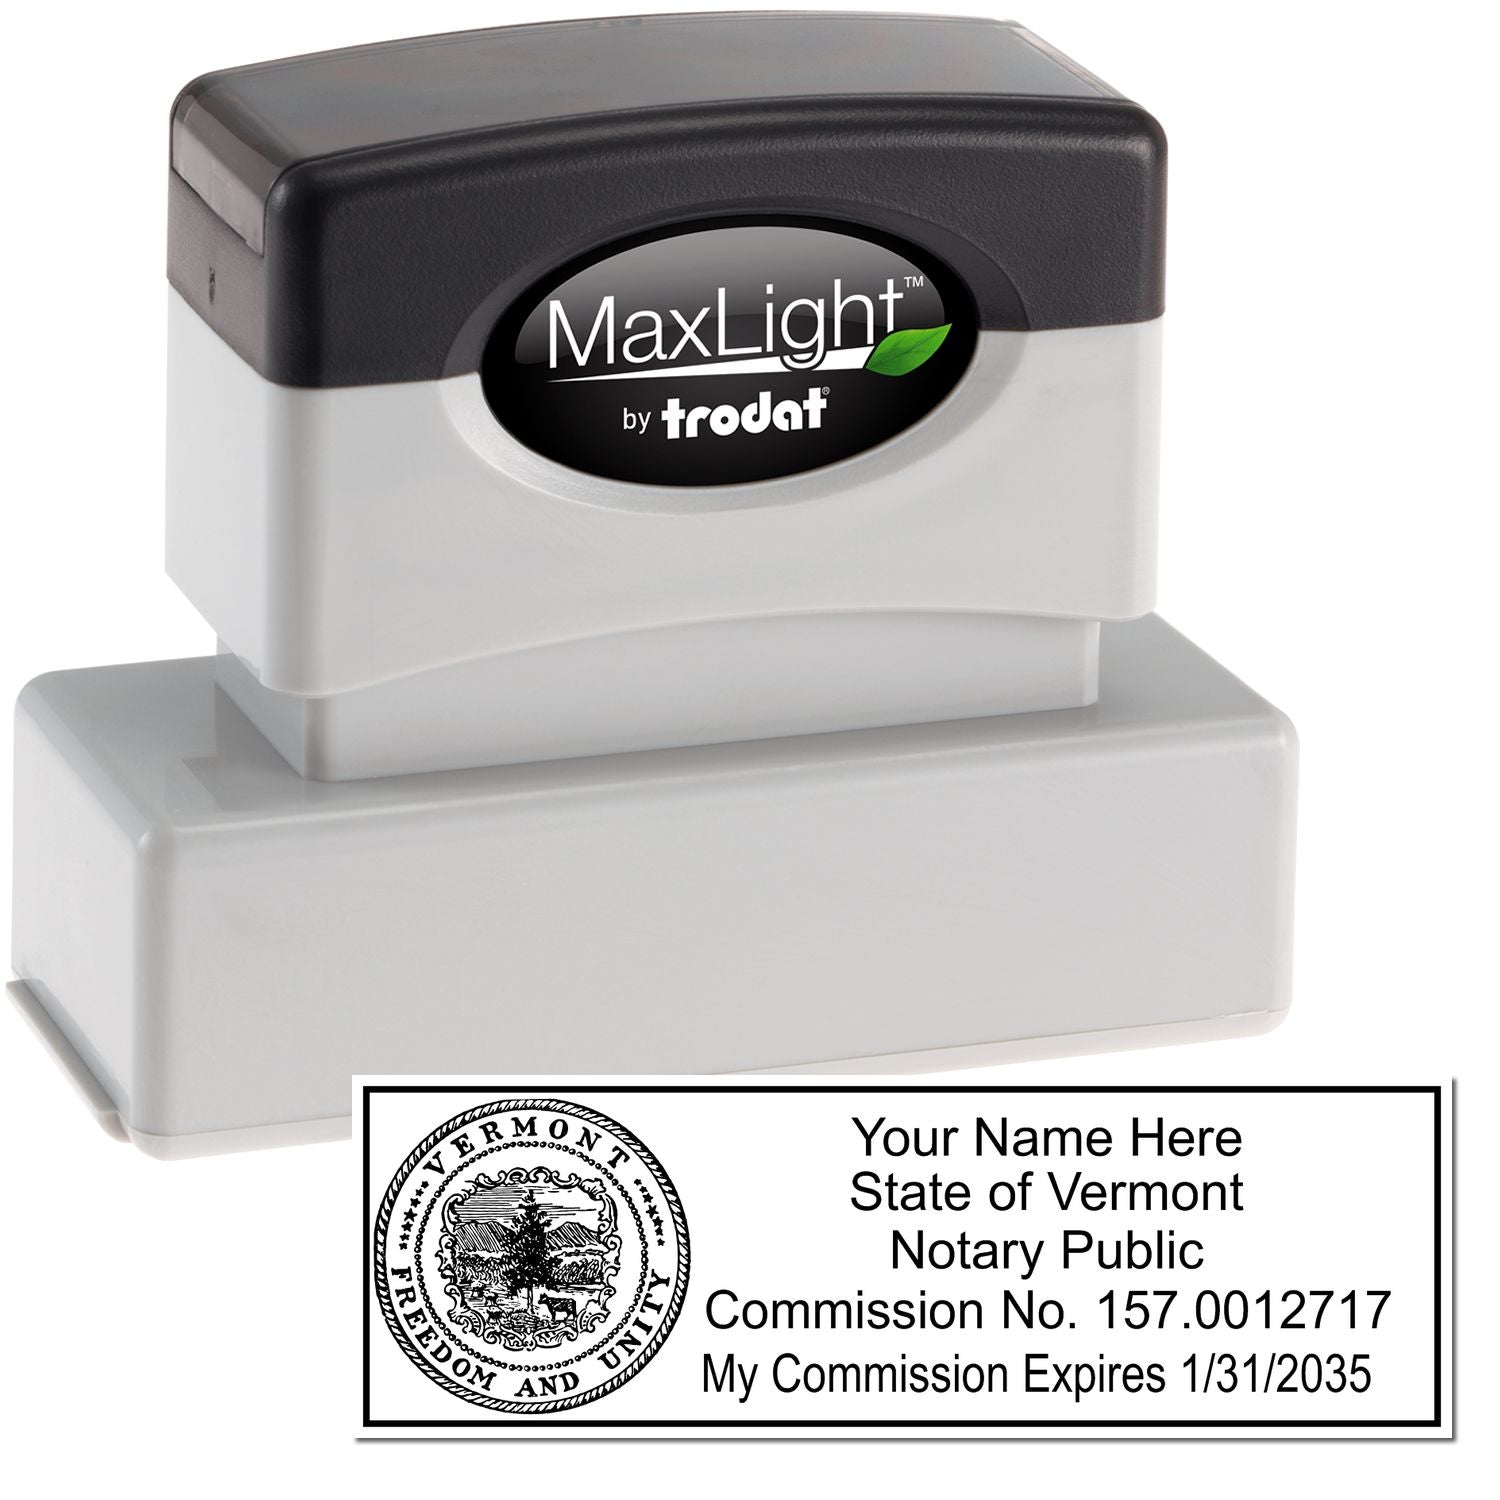 The main image for the MaxLight Premium Pre-Inked Vermont State Seal Notarial Stamp depicting a sample of the imprint and electronic files